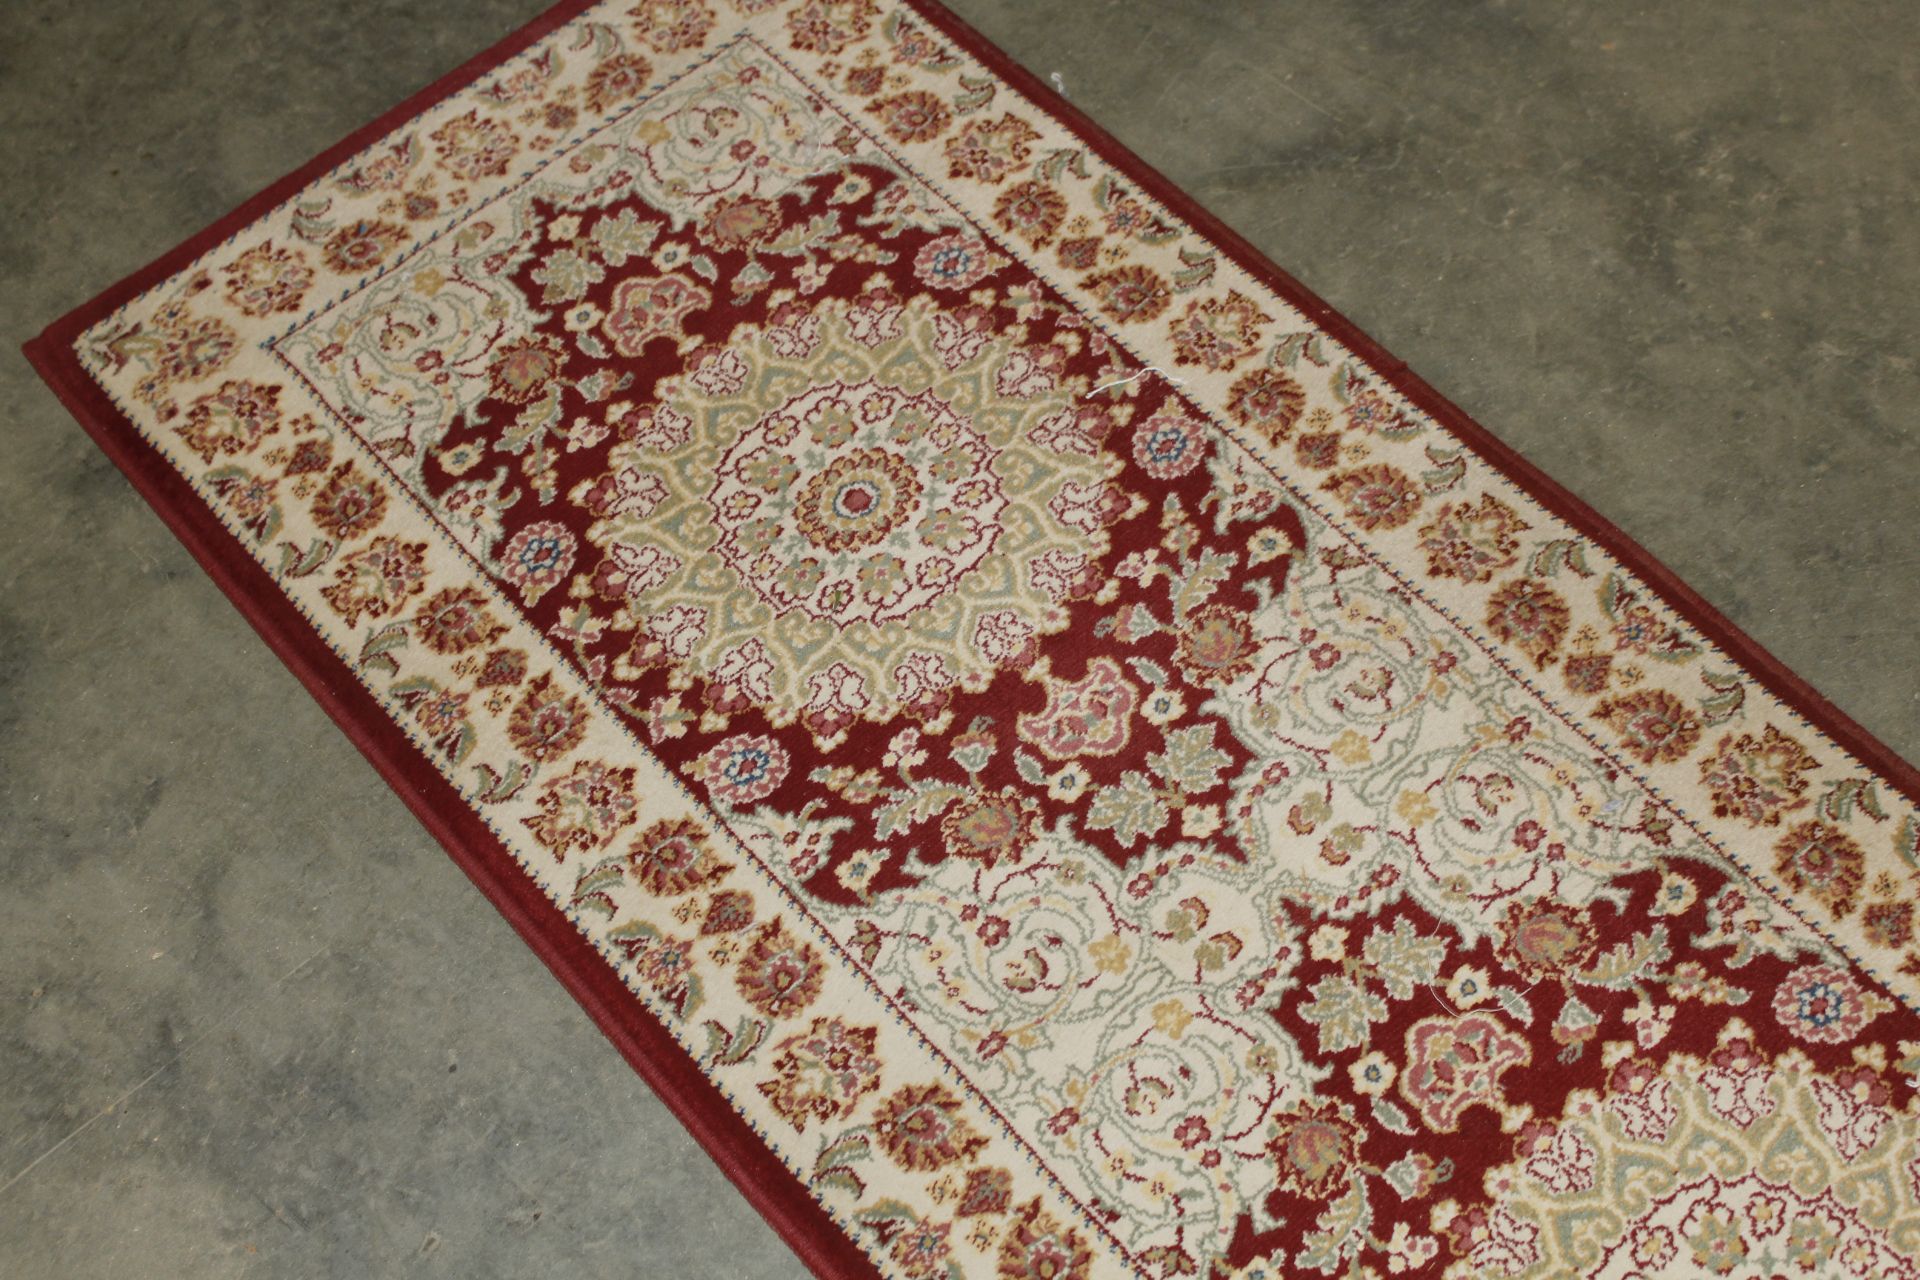 An approx. 8'4" x 2'3" floral patterned rug - Image 3 of 5